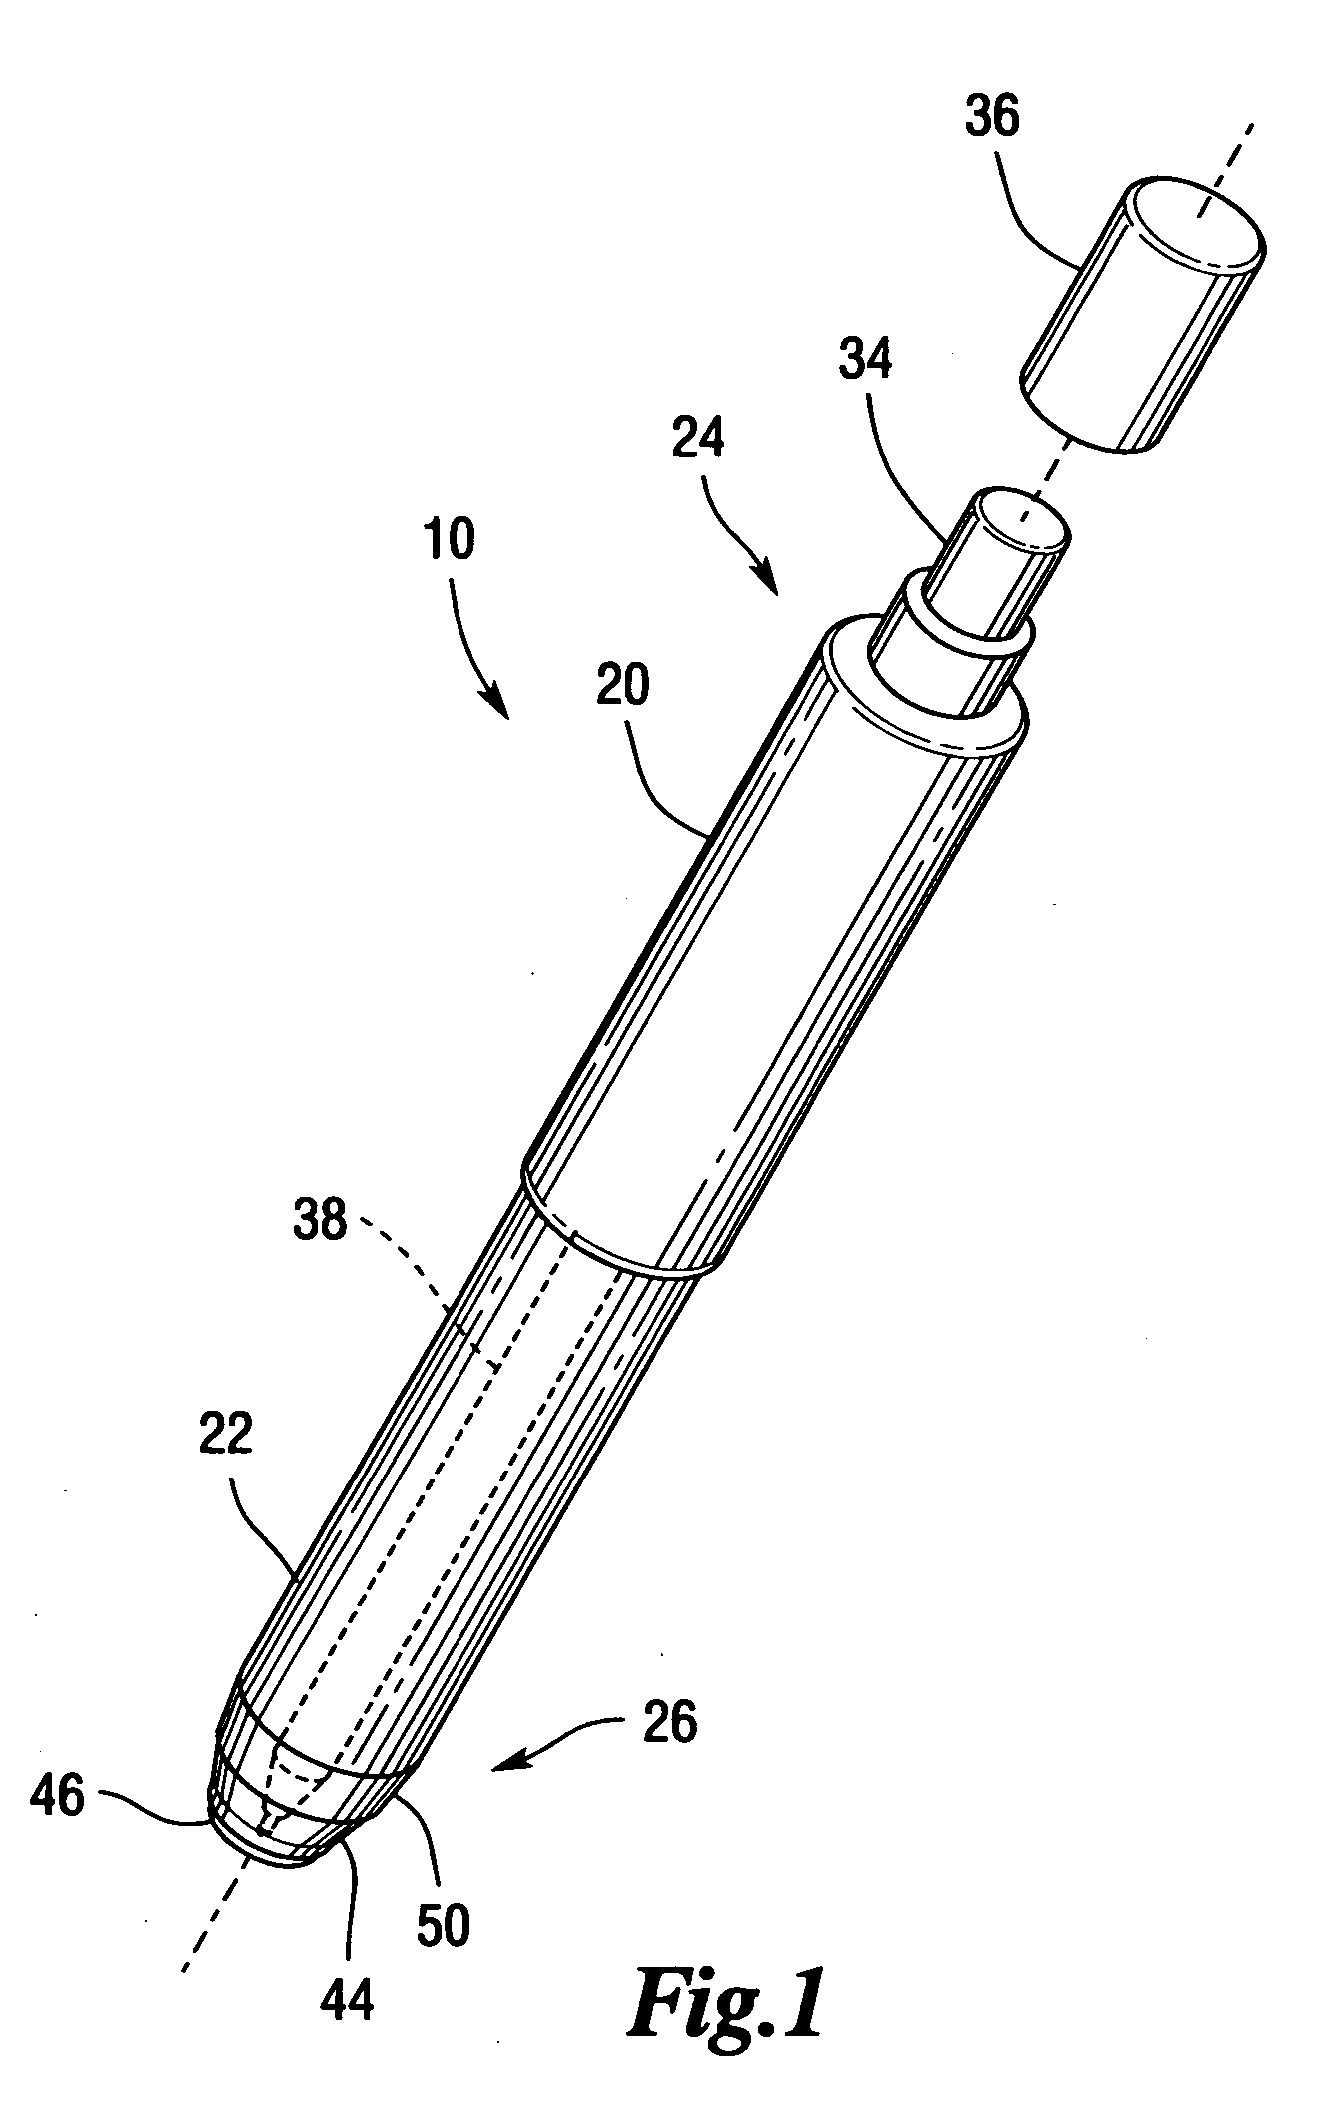 Combination pen or pencil and circular marking implement